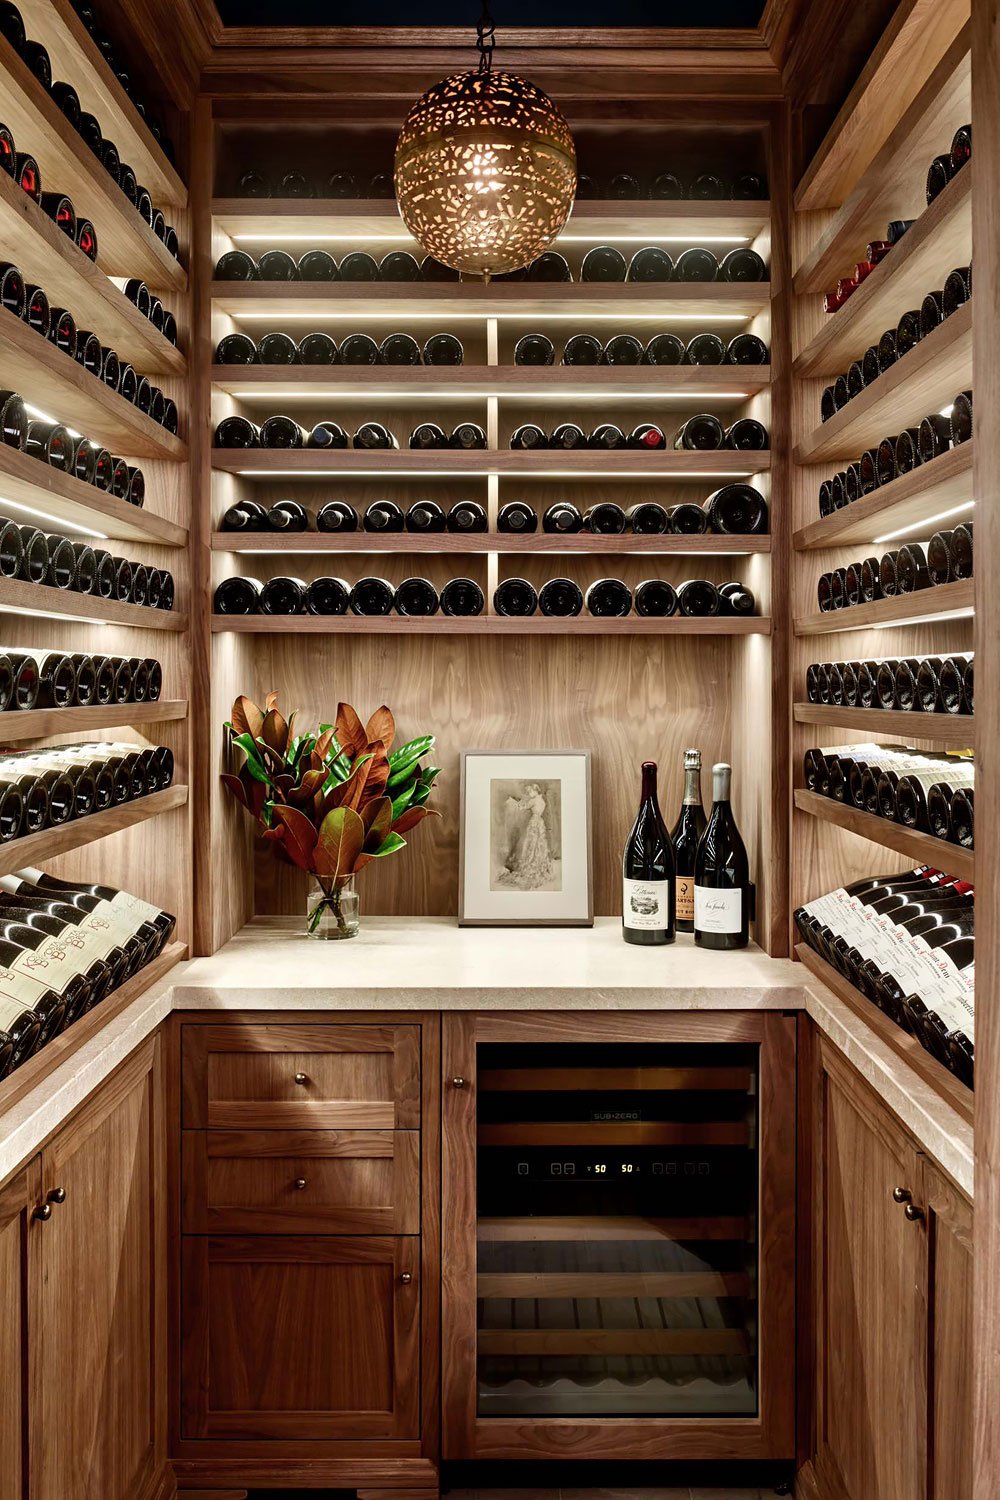 122522-Wood-Cabinet-And-Beige-Countertop-With-Pantry-Wine-Cellar.jpg